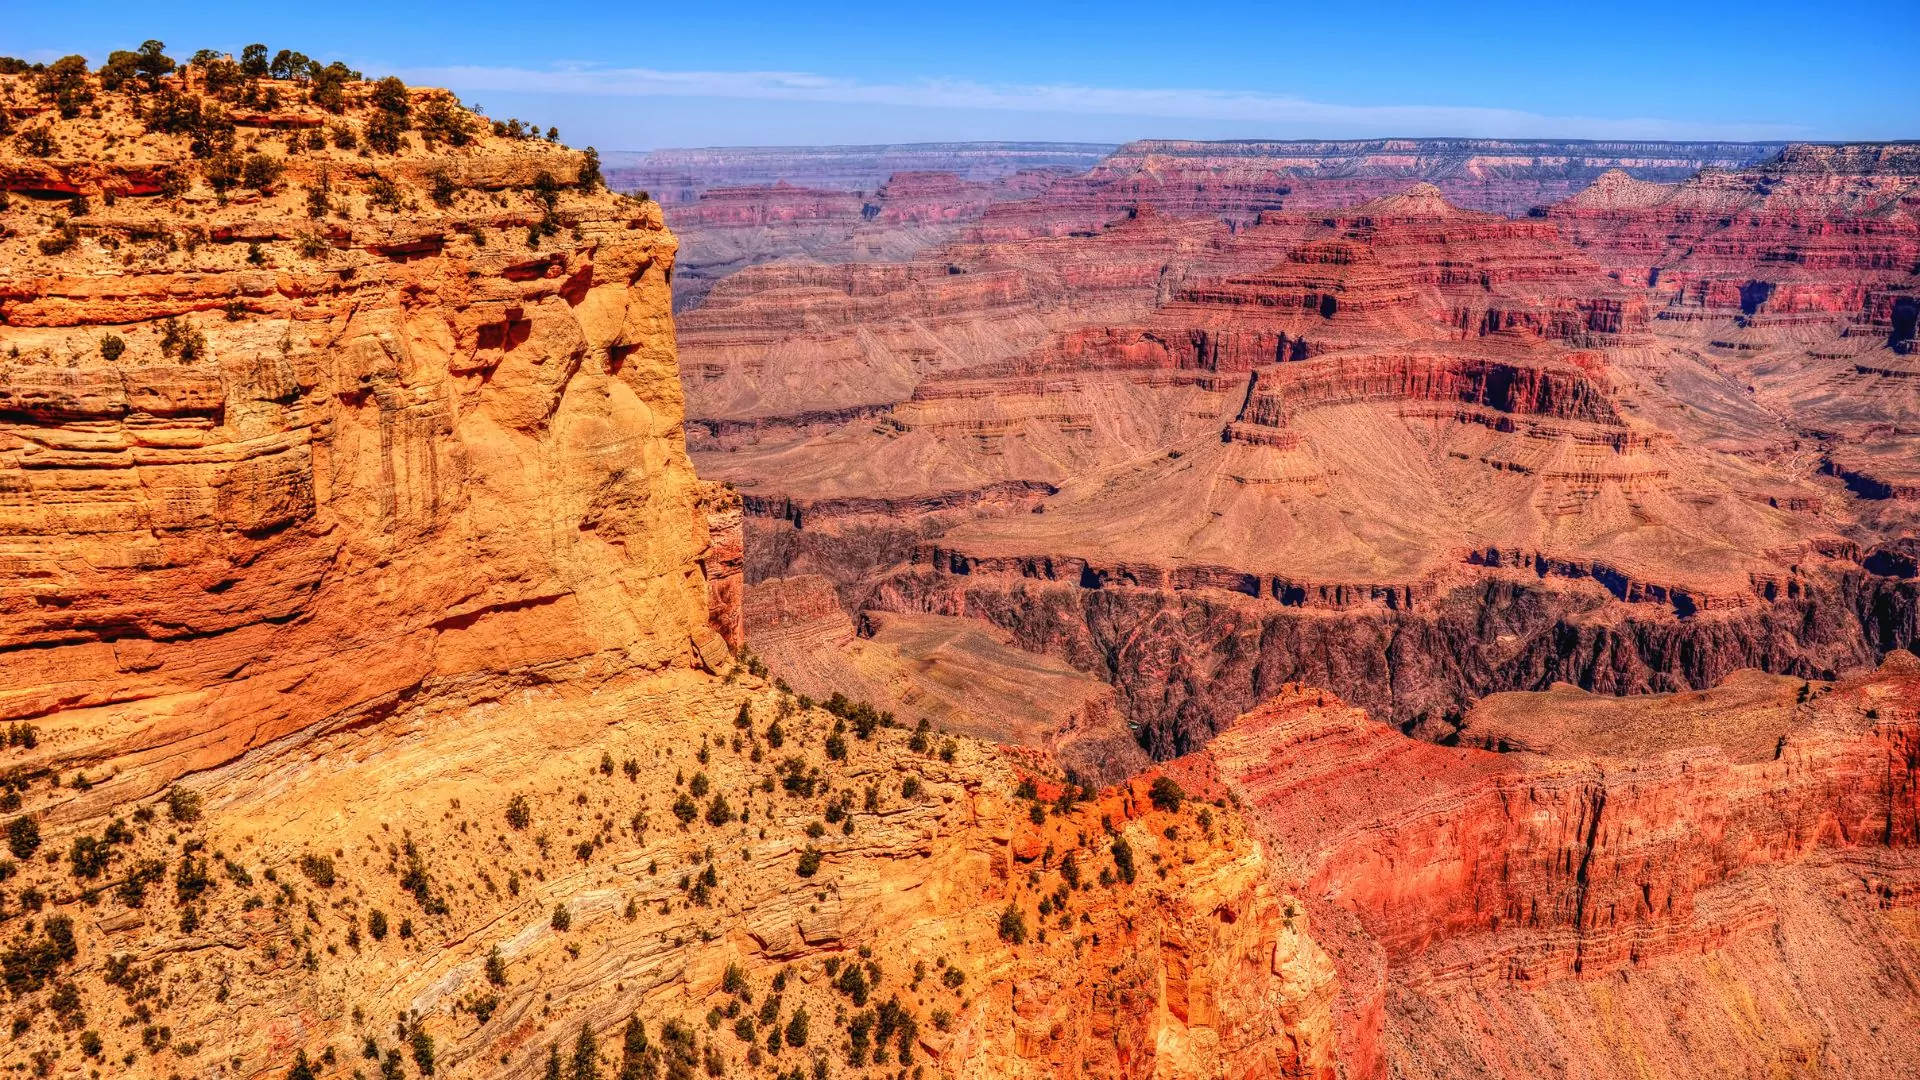 The red rock of the Grand Canyon stretches as far as the eye can see